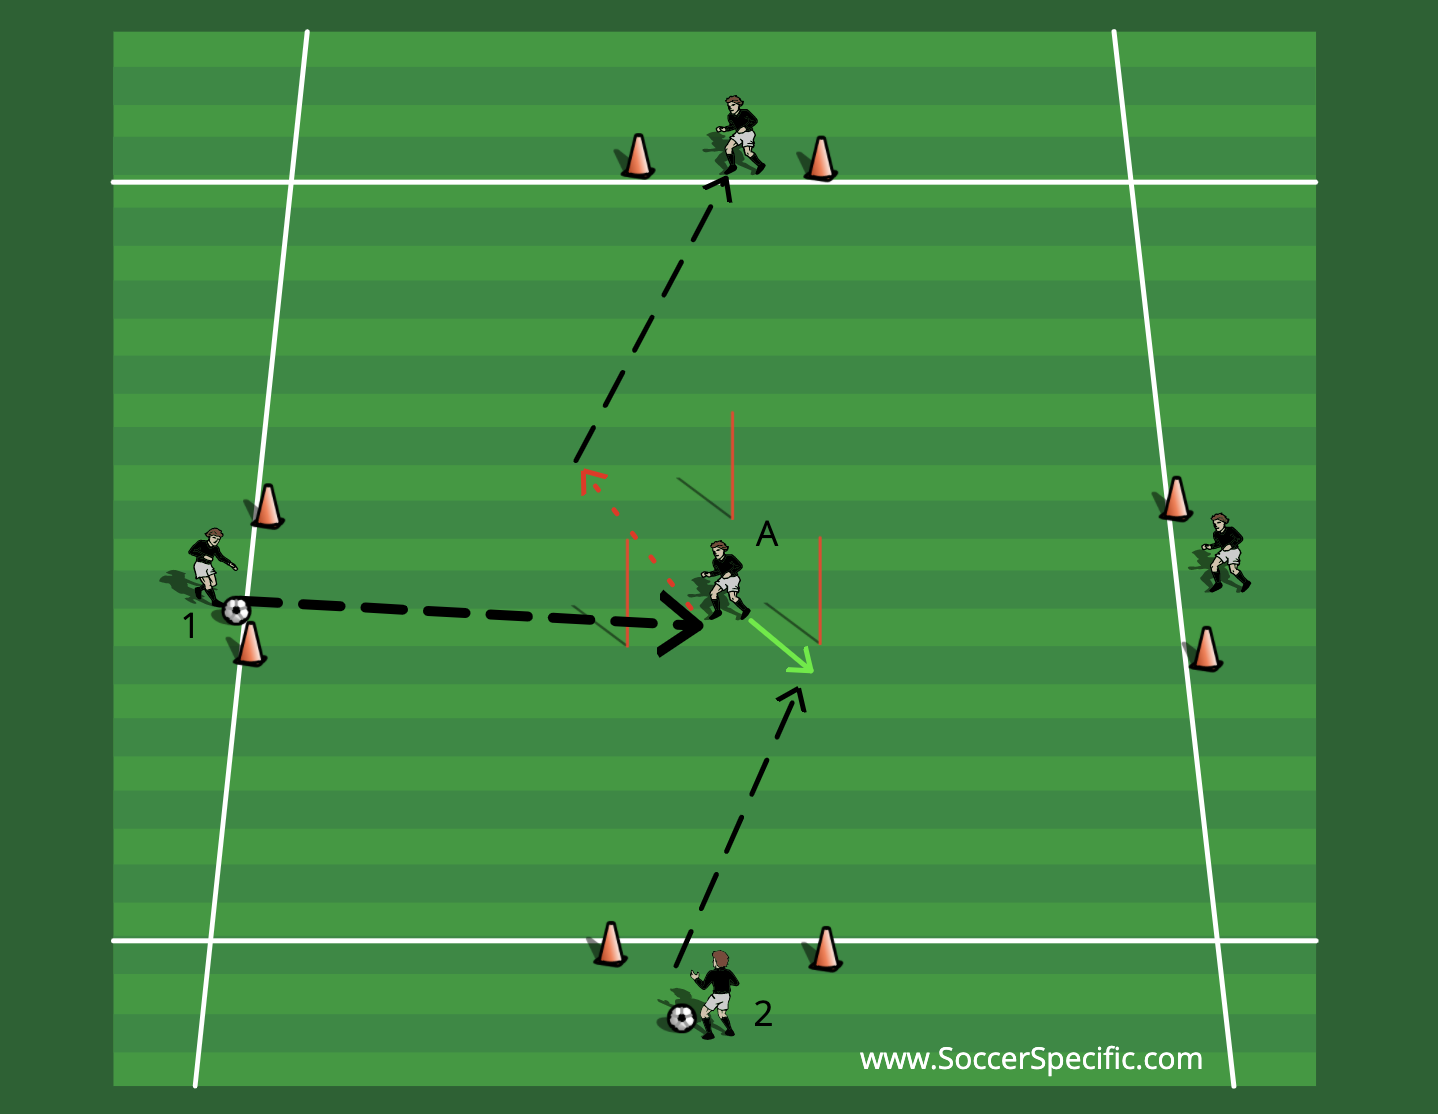 Carousel Social Distancing Coaching Session | SoccerSpecific.com